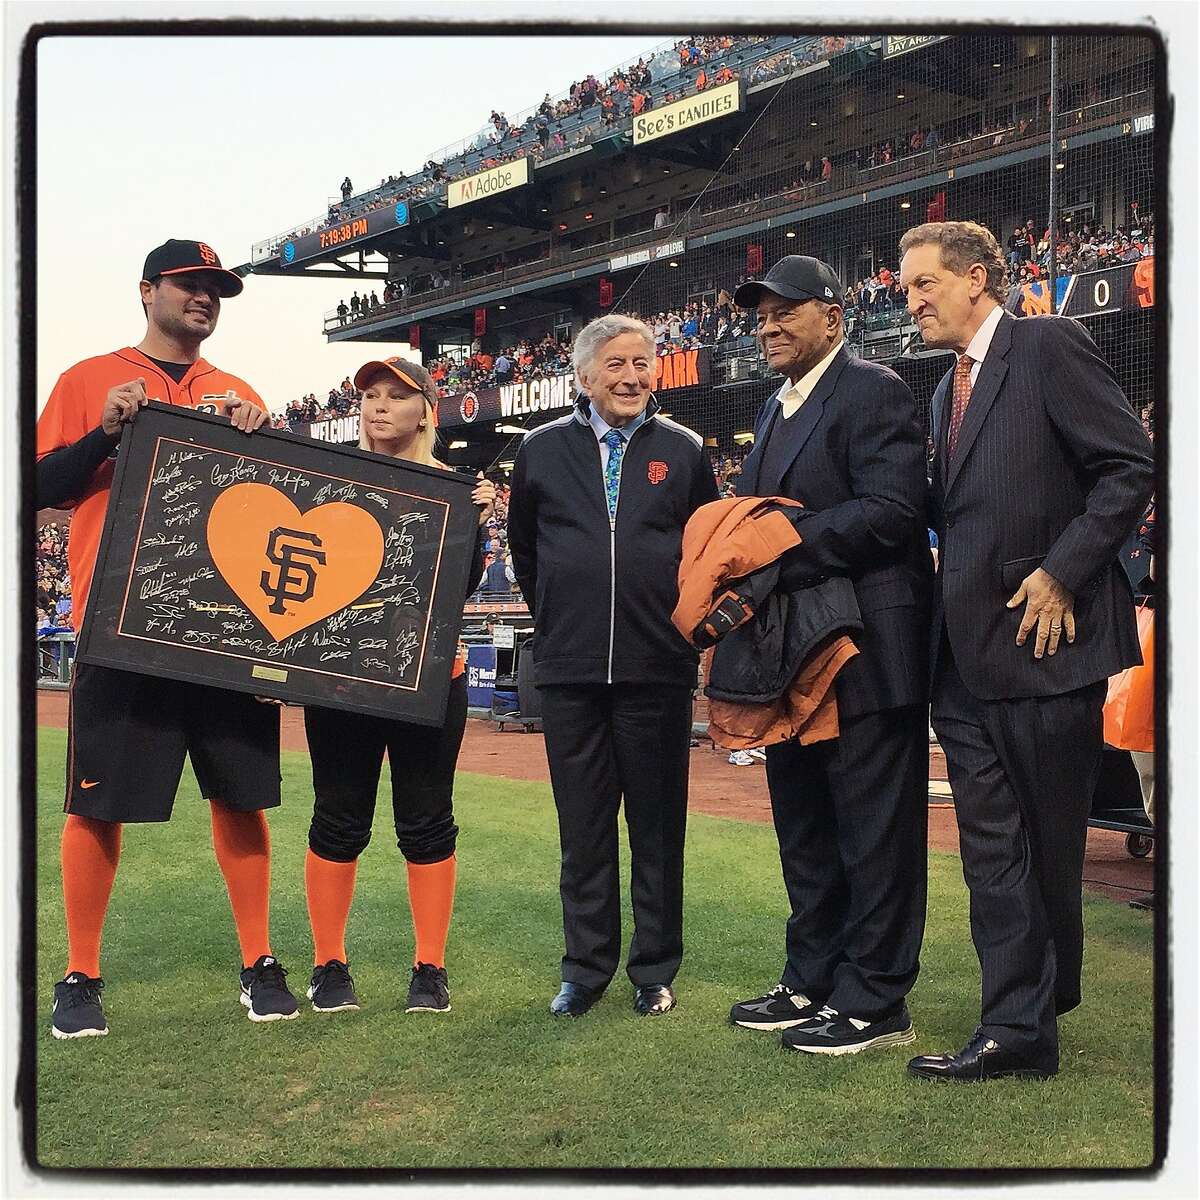 The SF Giants unveiled a new victory flag in honor of Tony Bennett (left) with Willie Mays and Giants CEO Larry Baer at AT&T Park. August 2016.